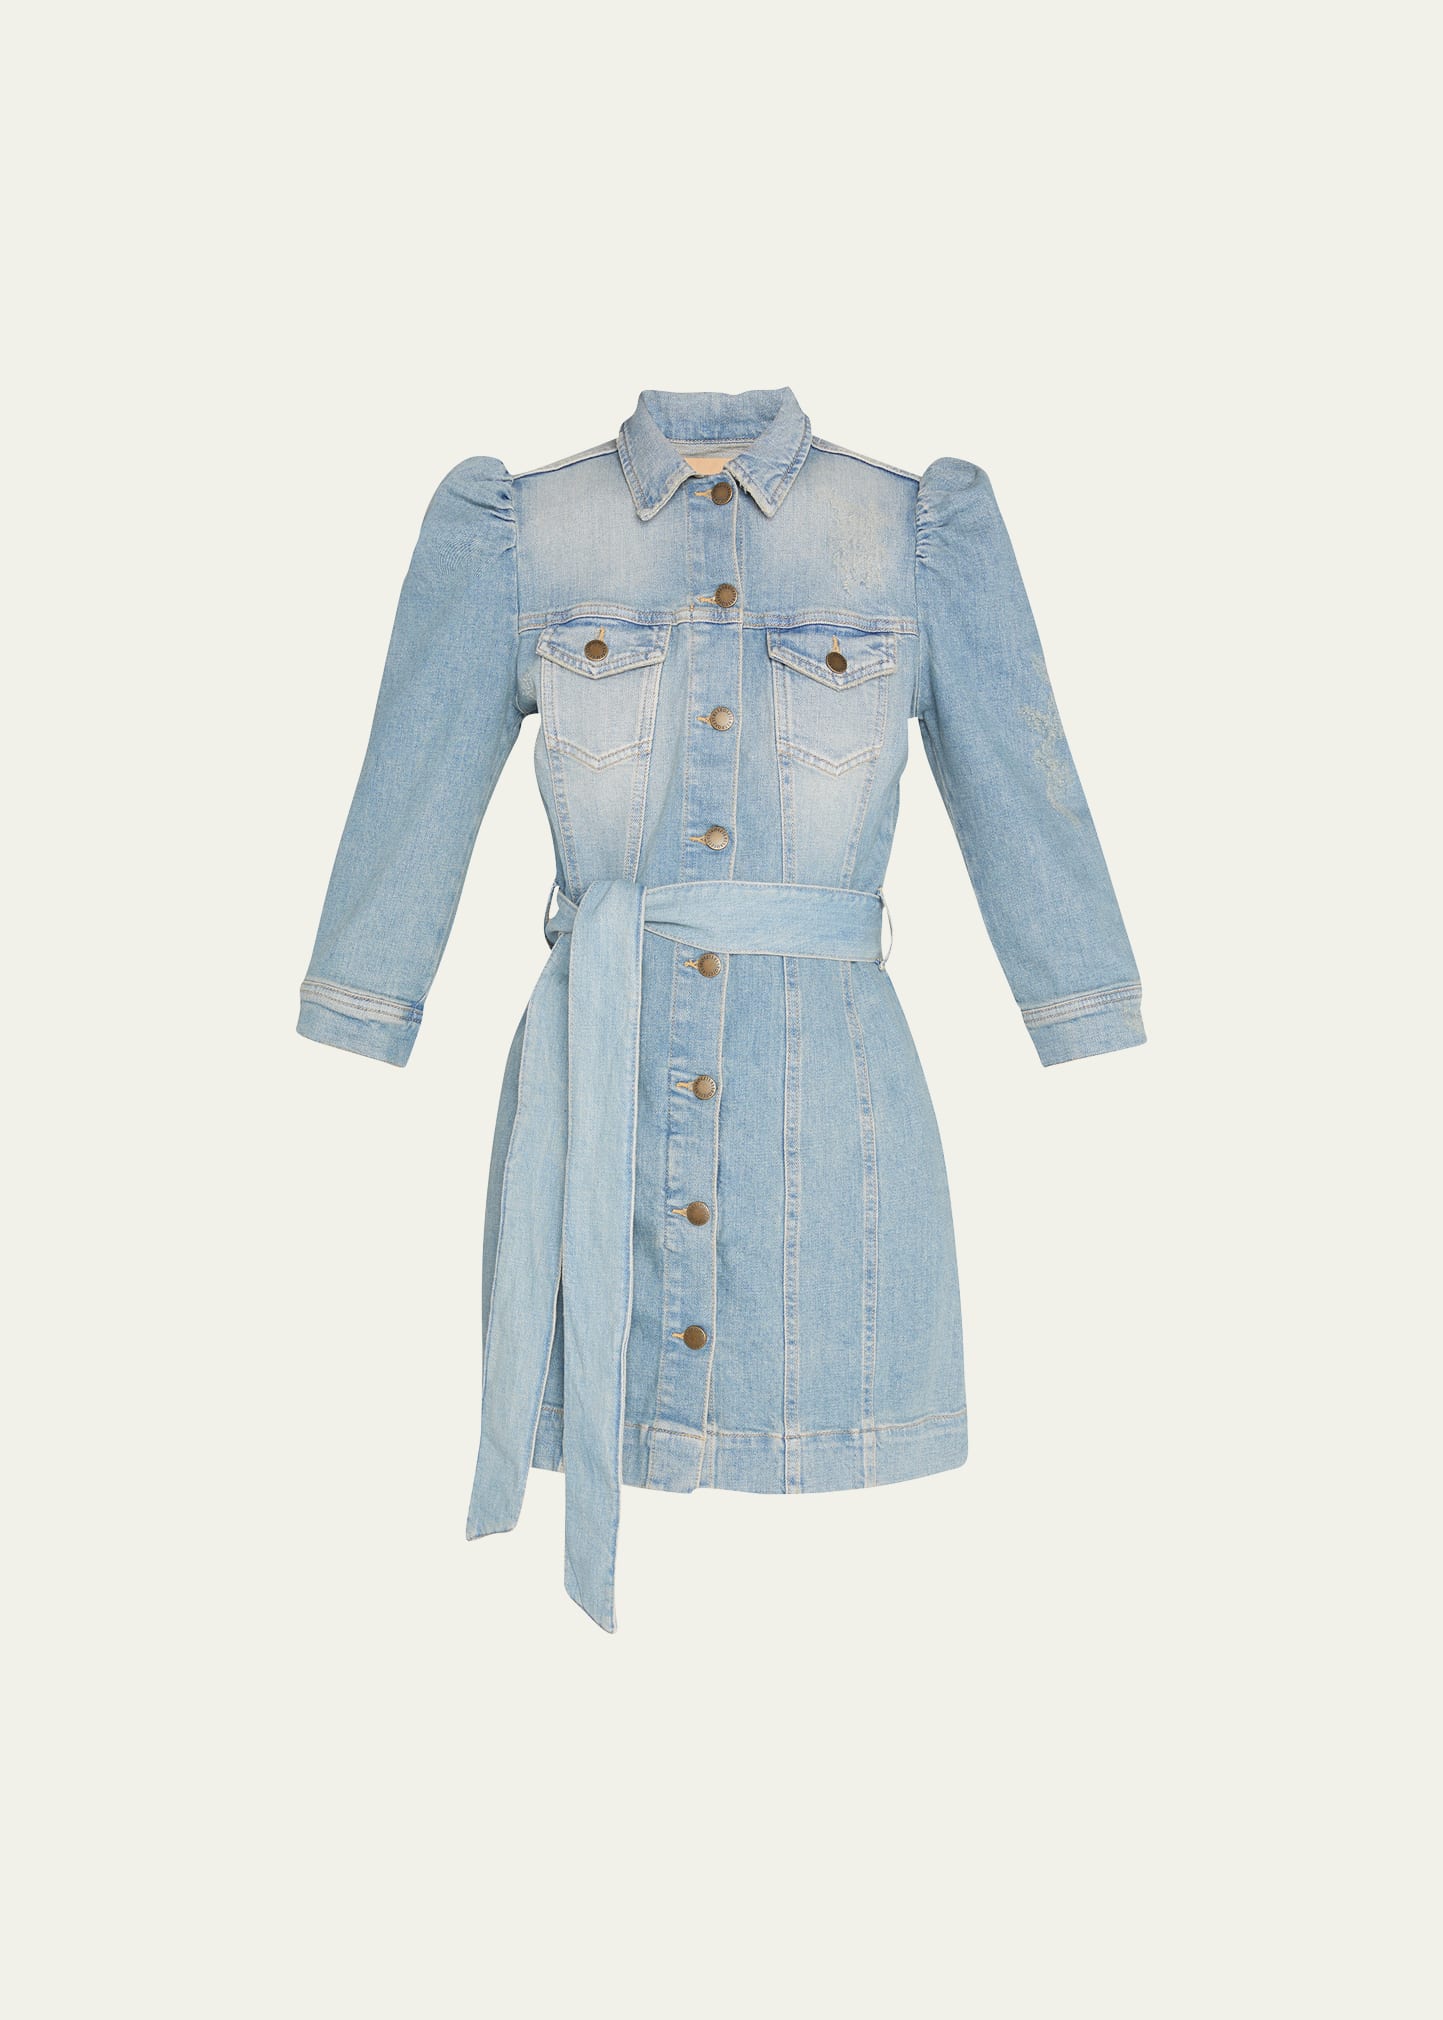 Her lip to♡Lace Belted Denim Dress Blue